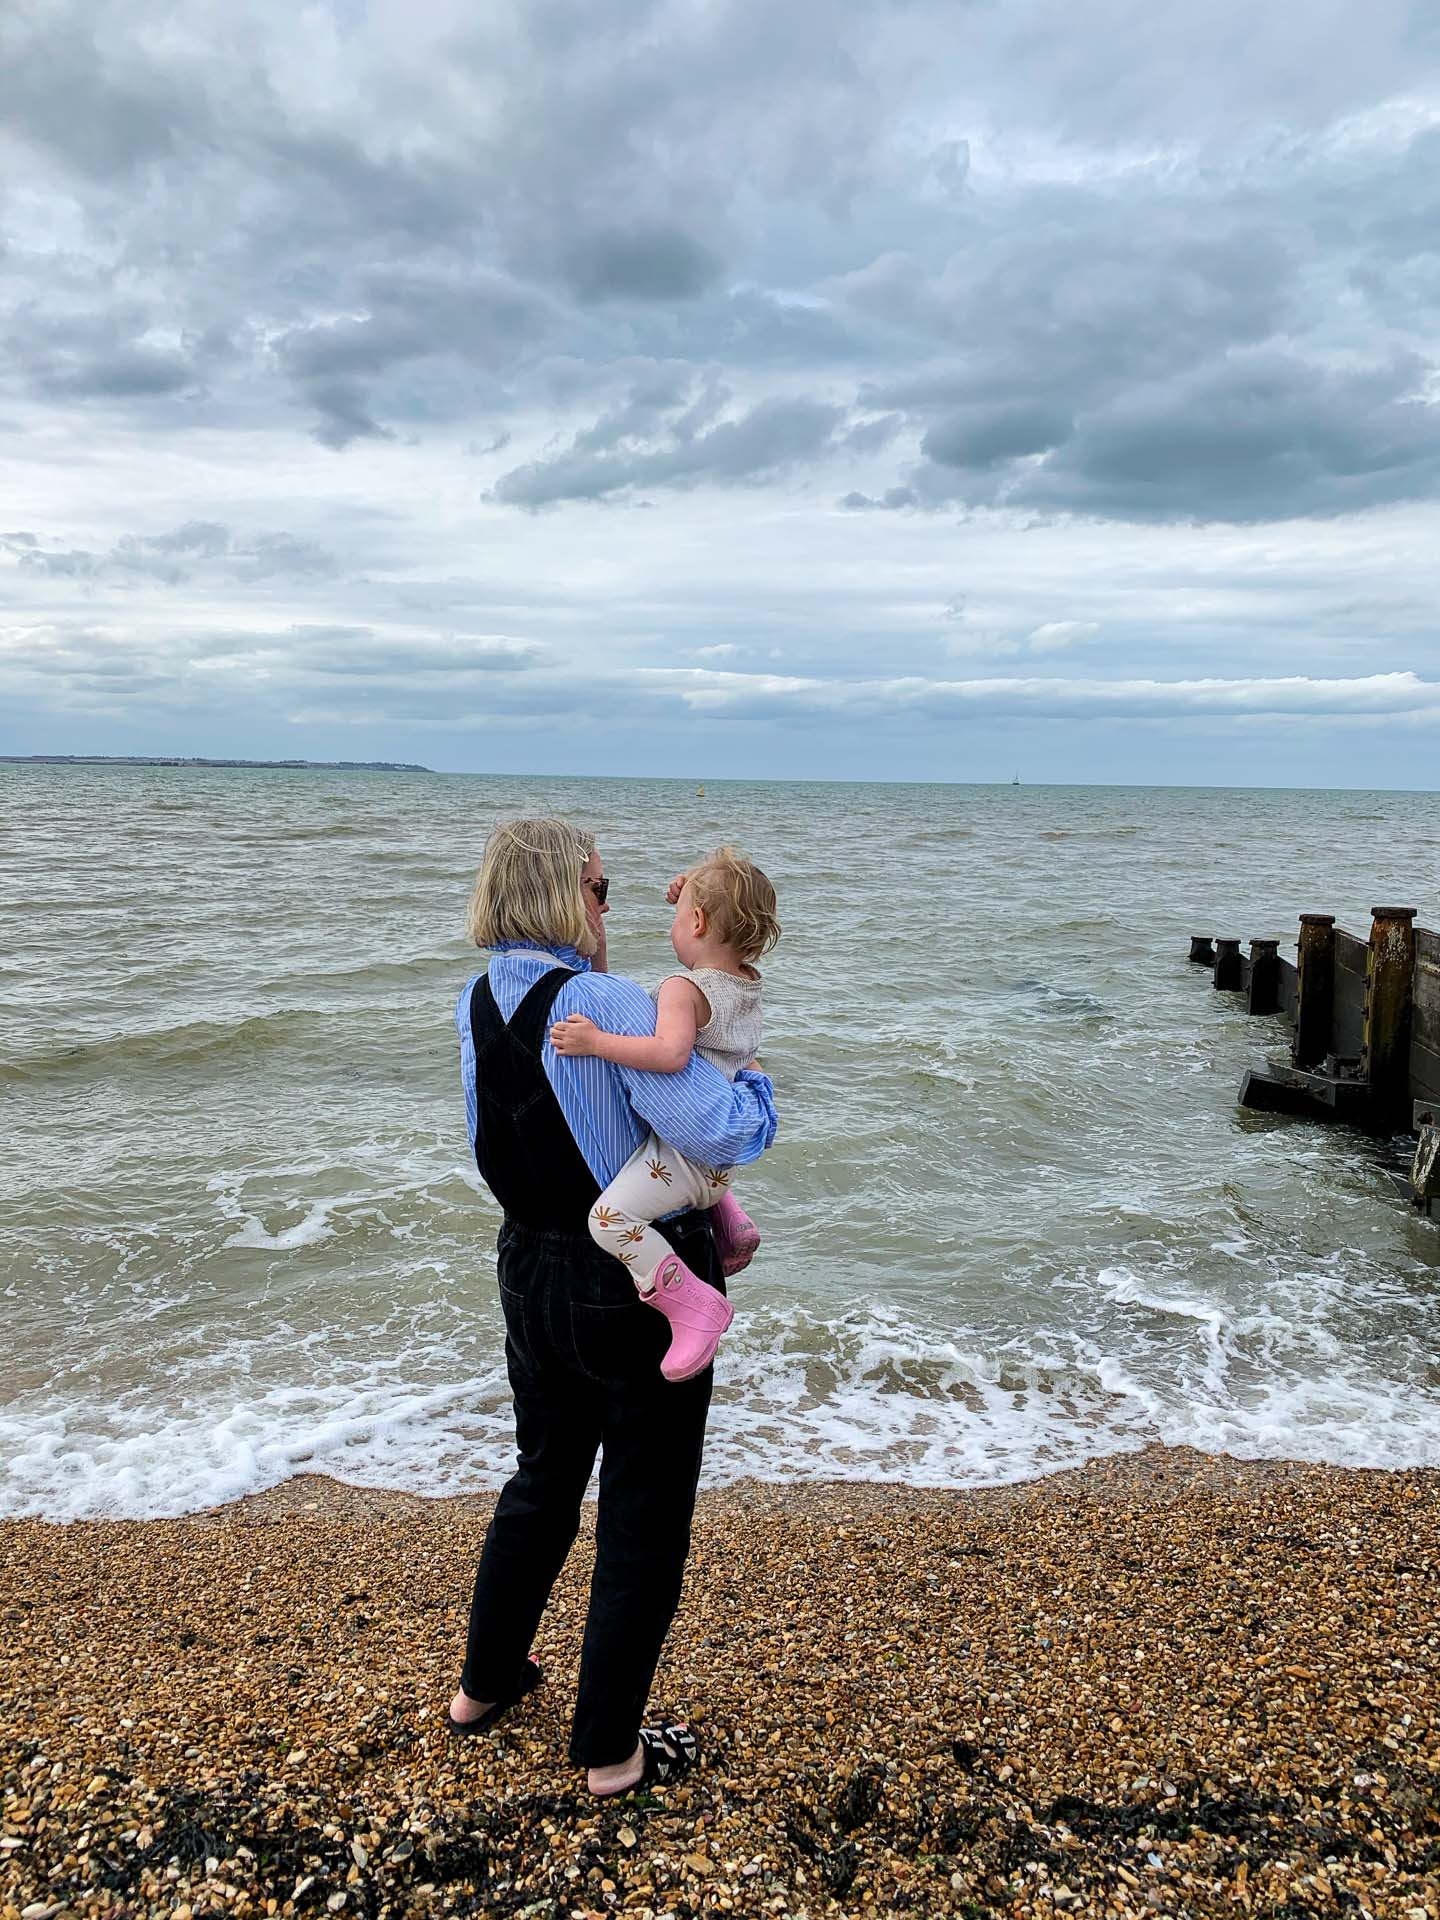 A WEEKEND IN WHITSTABLE